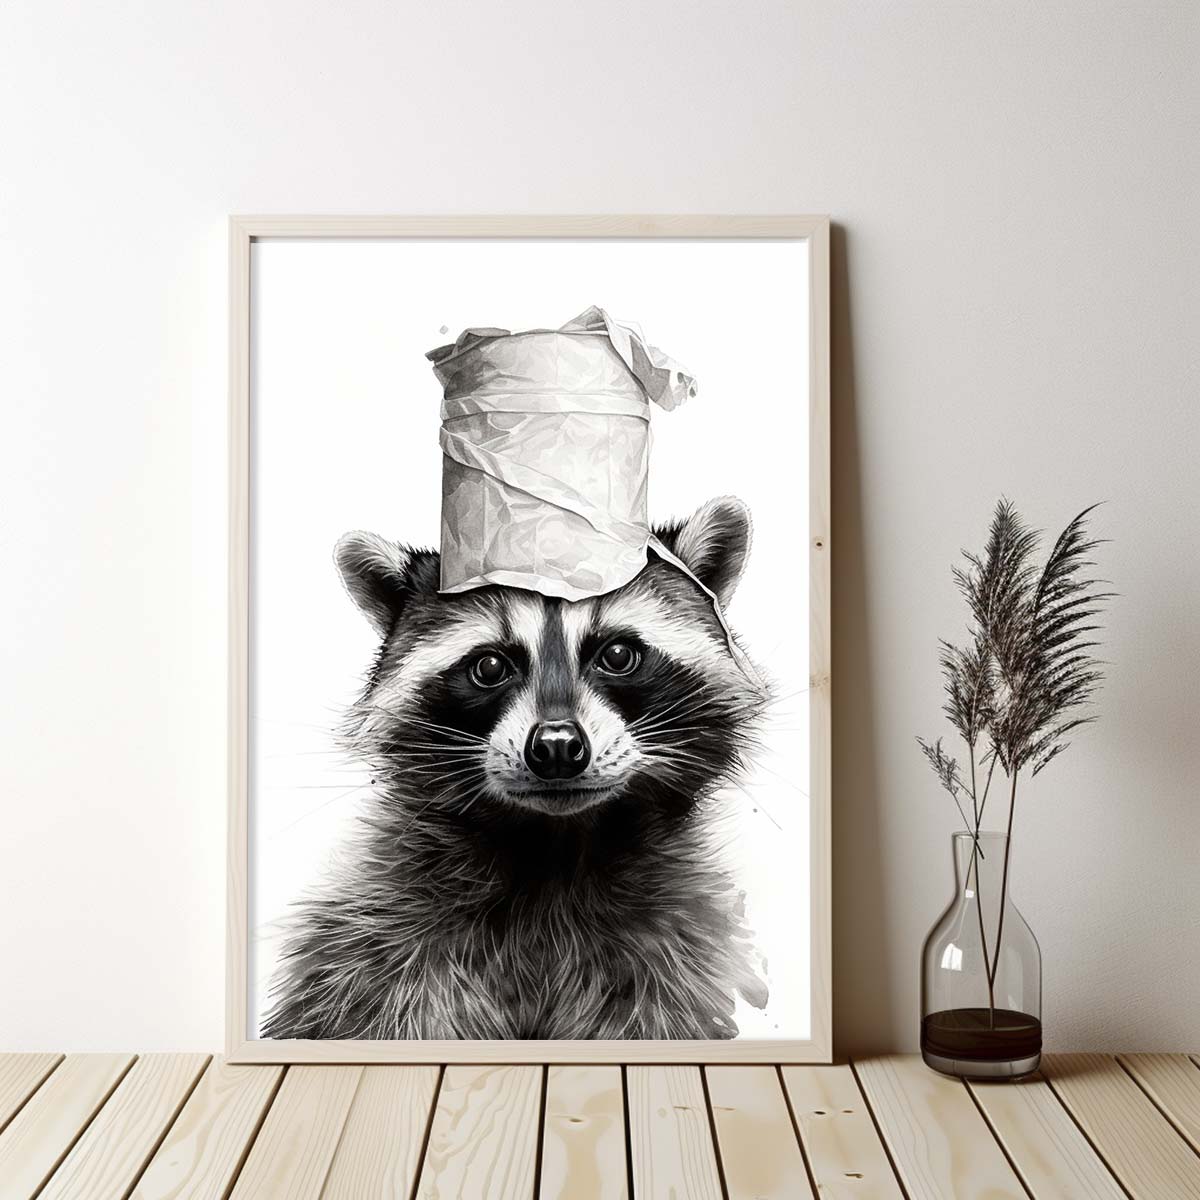 Cute Racoon With Toilet Paper, Canvas Or Poster, Funny Racoon Art, Bathroom Wall Decor, Home Decor, Bathroom Wall Art, Racoon Wall Decor, Animal Decor, Animal Gift, Animal Illustration, Digital Download